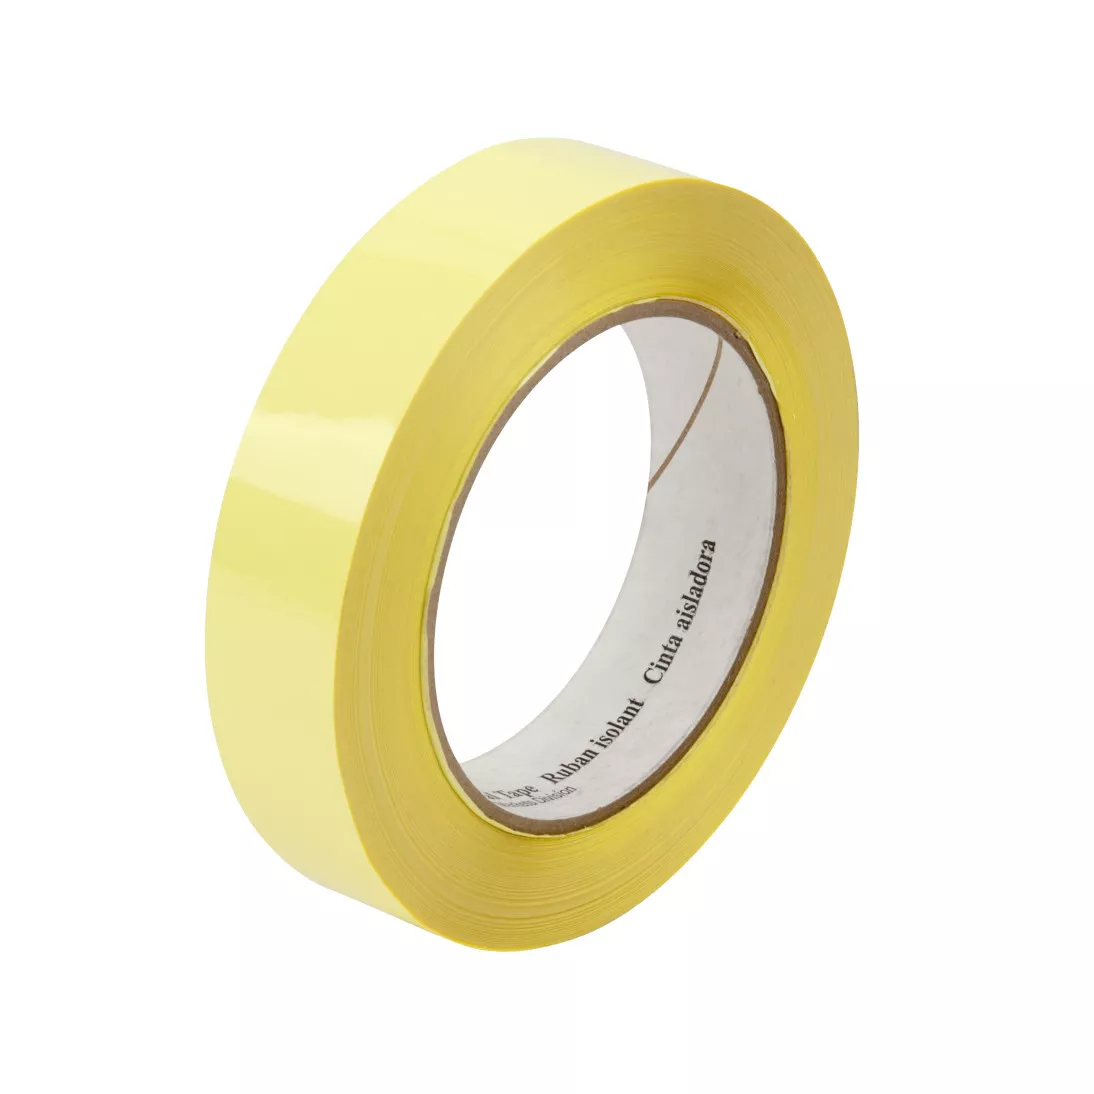 3M™ Polyester Film Electrical Tape 1318-2, Yellow 24 in X 72 yd, 3-in
paper core, Log roll, 1 Roll/Case